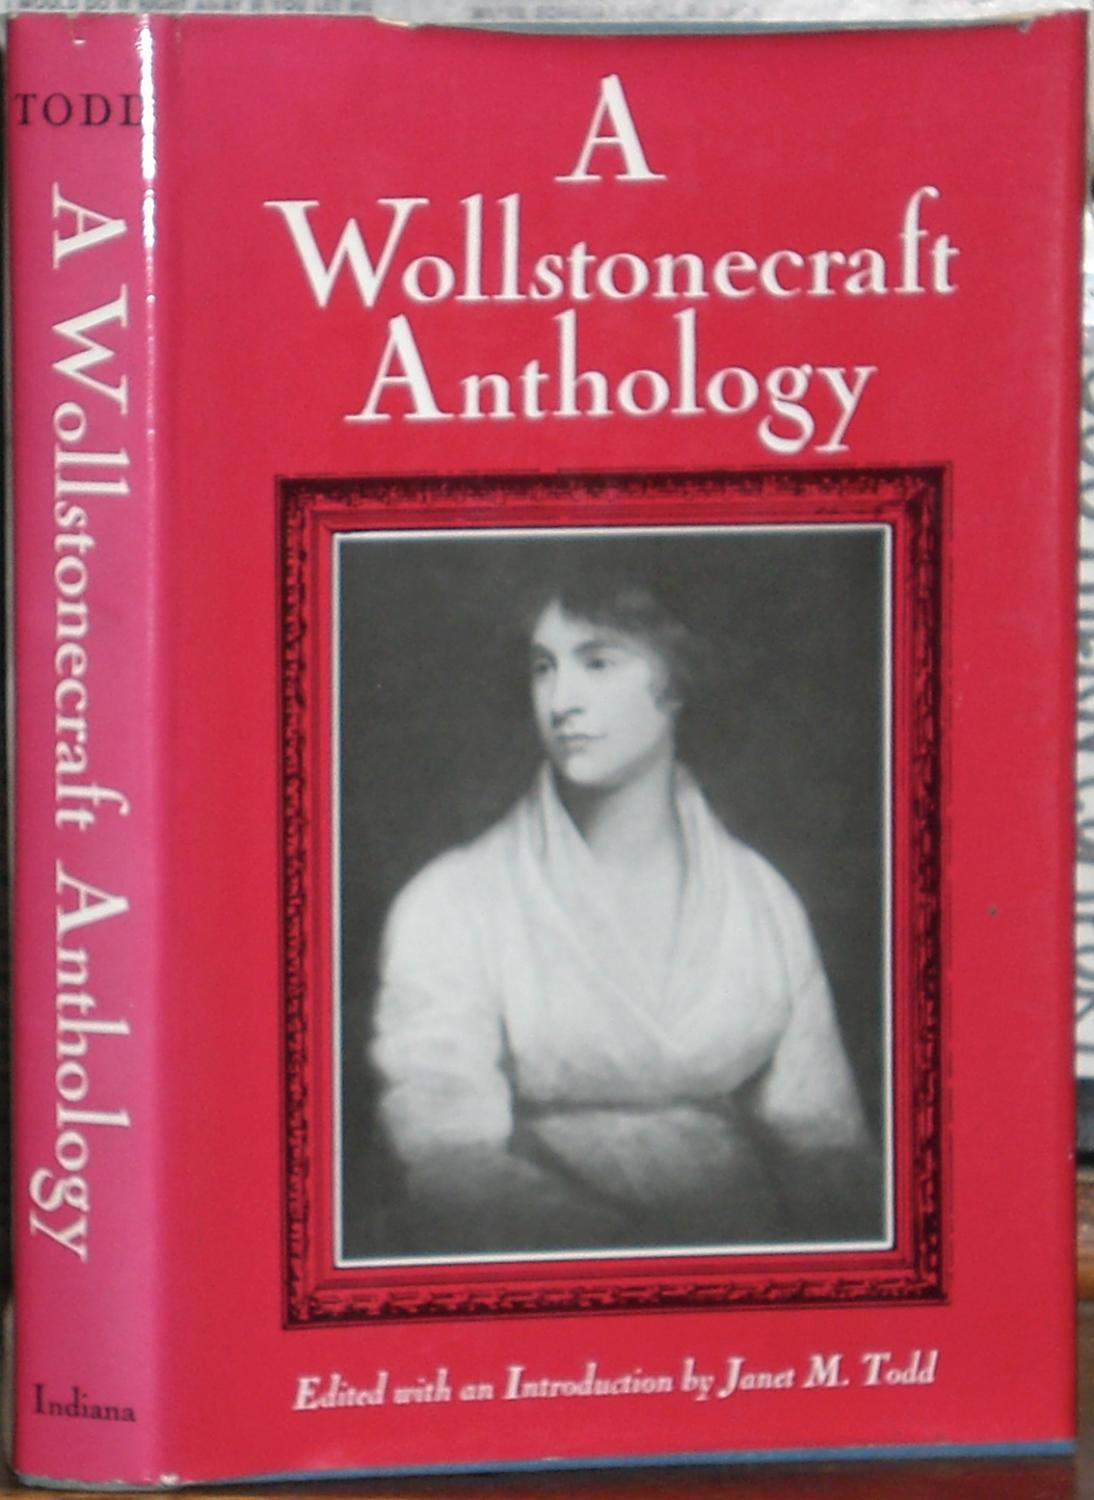 A Wollstonecraft Anthology. Edited, with an Introduction, by Janet M. Todd. - WOLLSTONECRAFT (MARY) [1759-1797] Todd (Janet M.) editor.